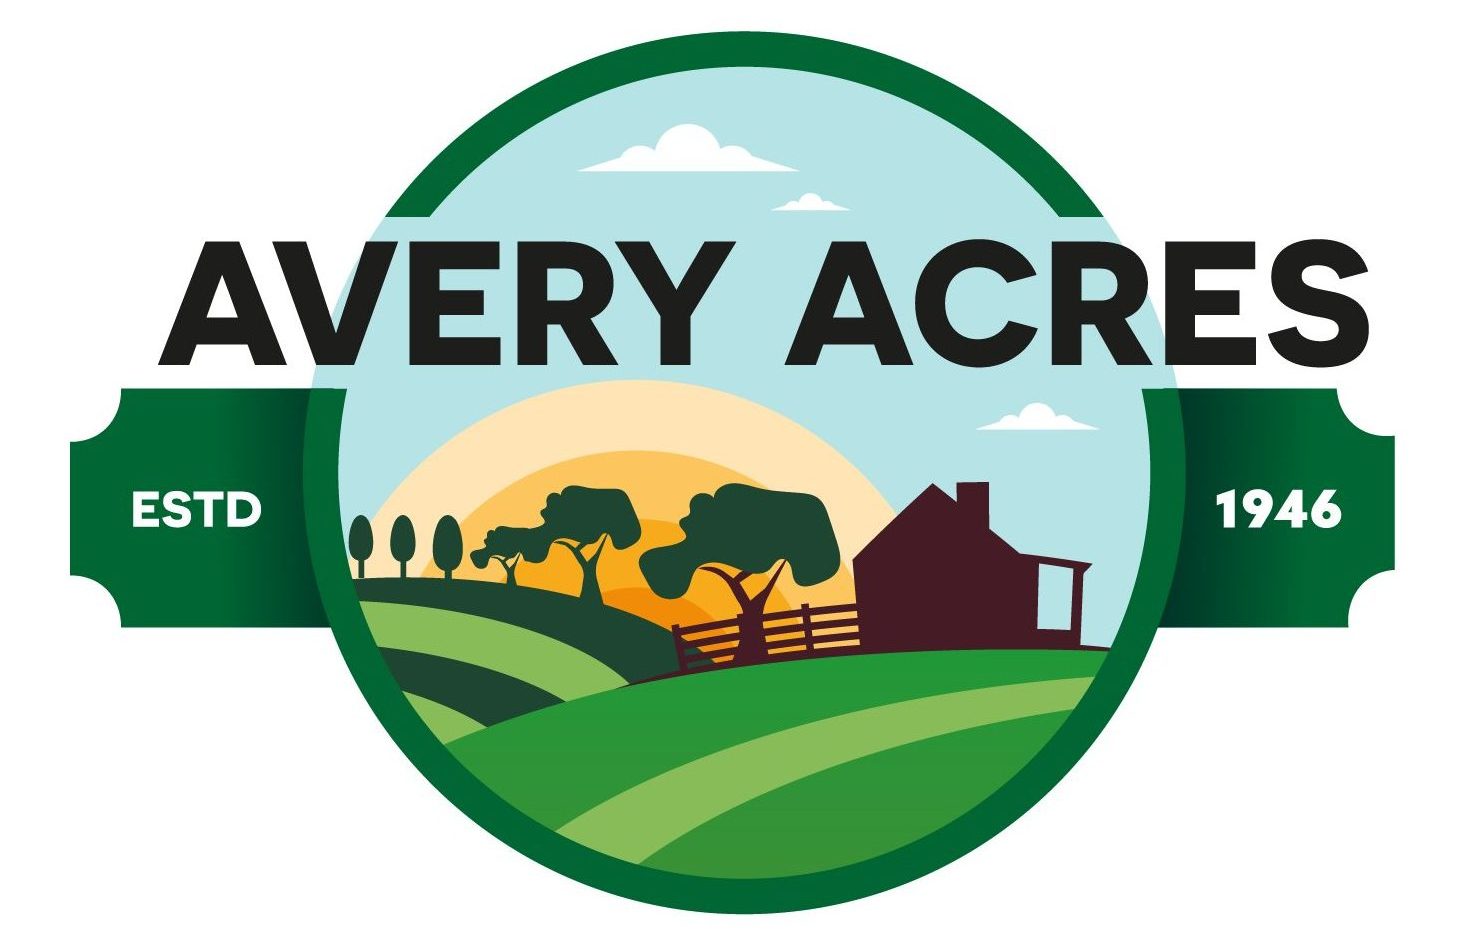 Avery Acres Manufactured Home Community